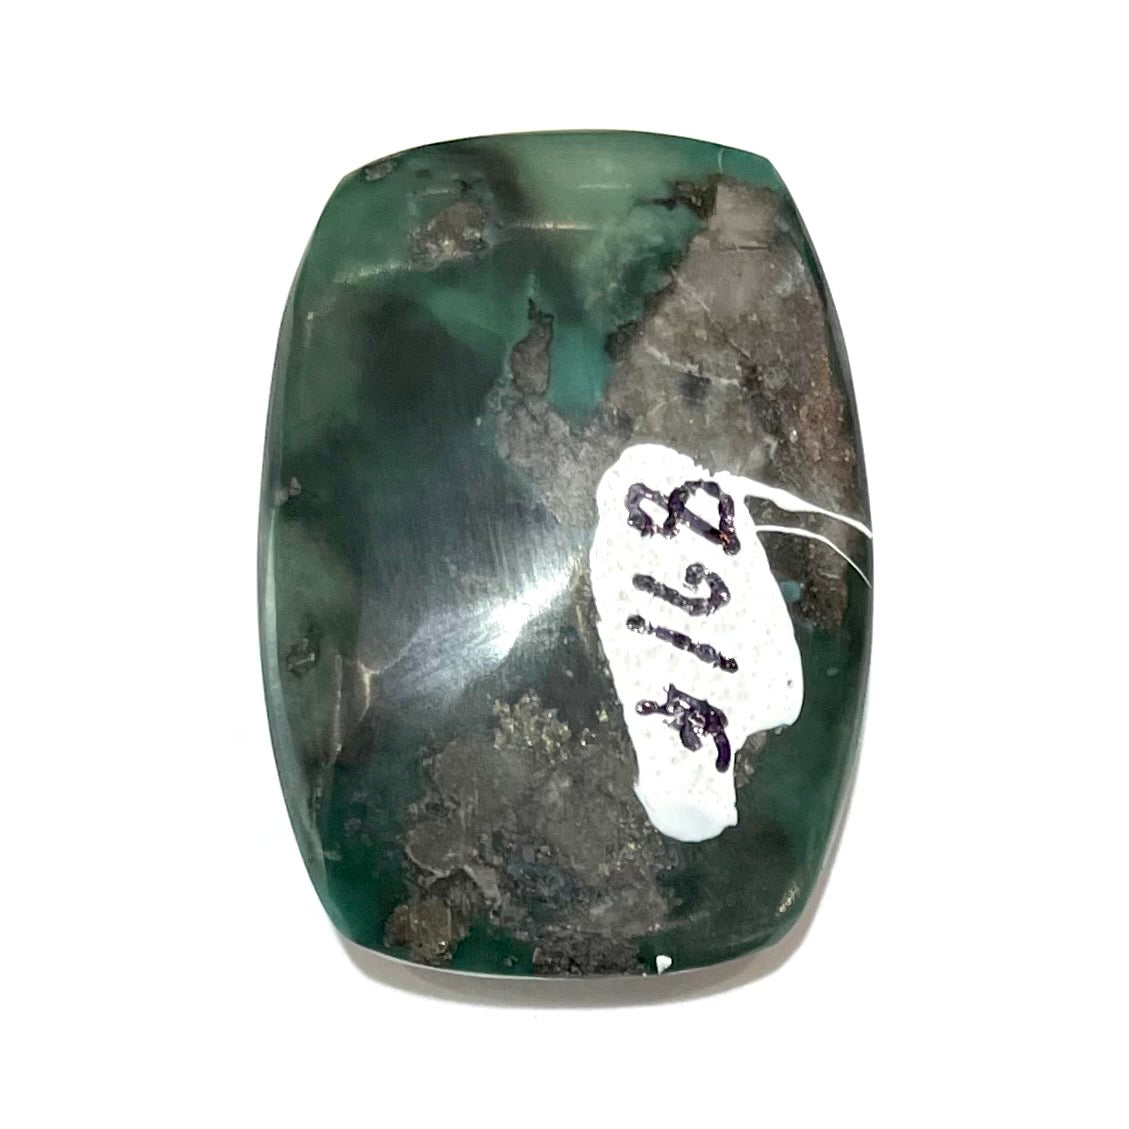 A loose, polished dark green turquoise stone from Royston Mining District, Nevada.